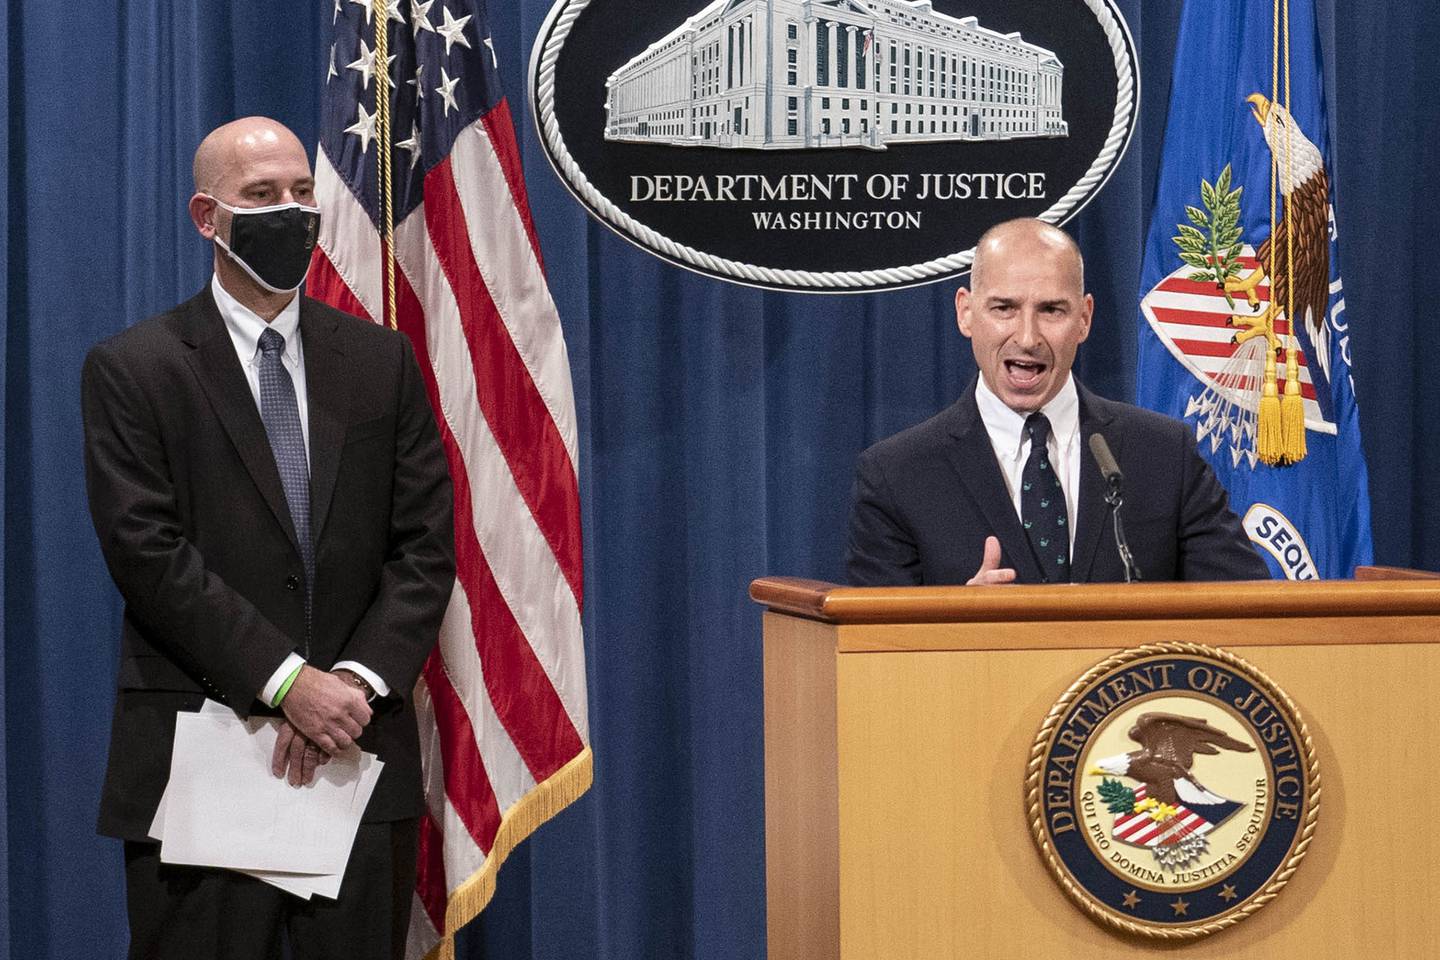 Steven D'Antuono, head of the FBI Washington field office, left, listens as acting U.S. Attorney Michael Sherwin, speaks during a news conference Tuesday, Jan. 12, 2021, in Washington.